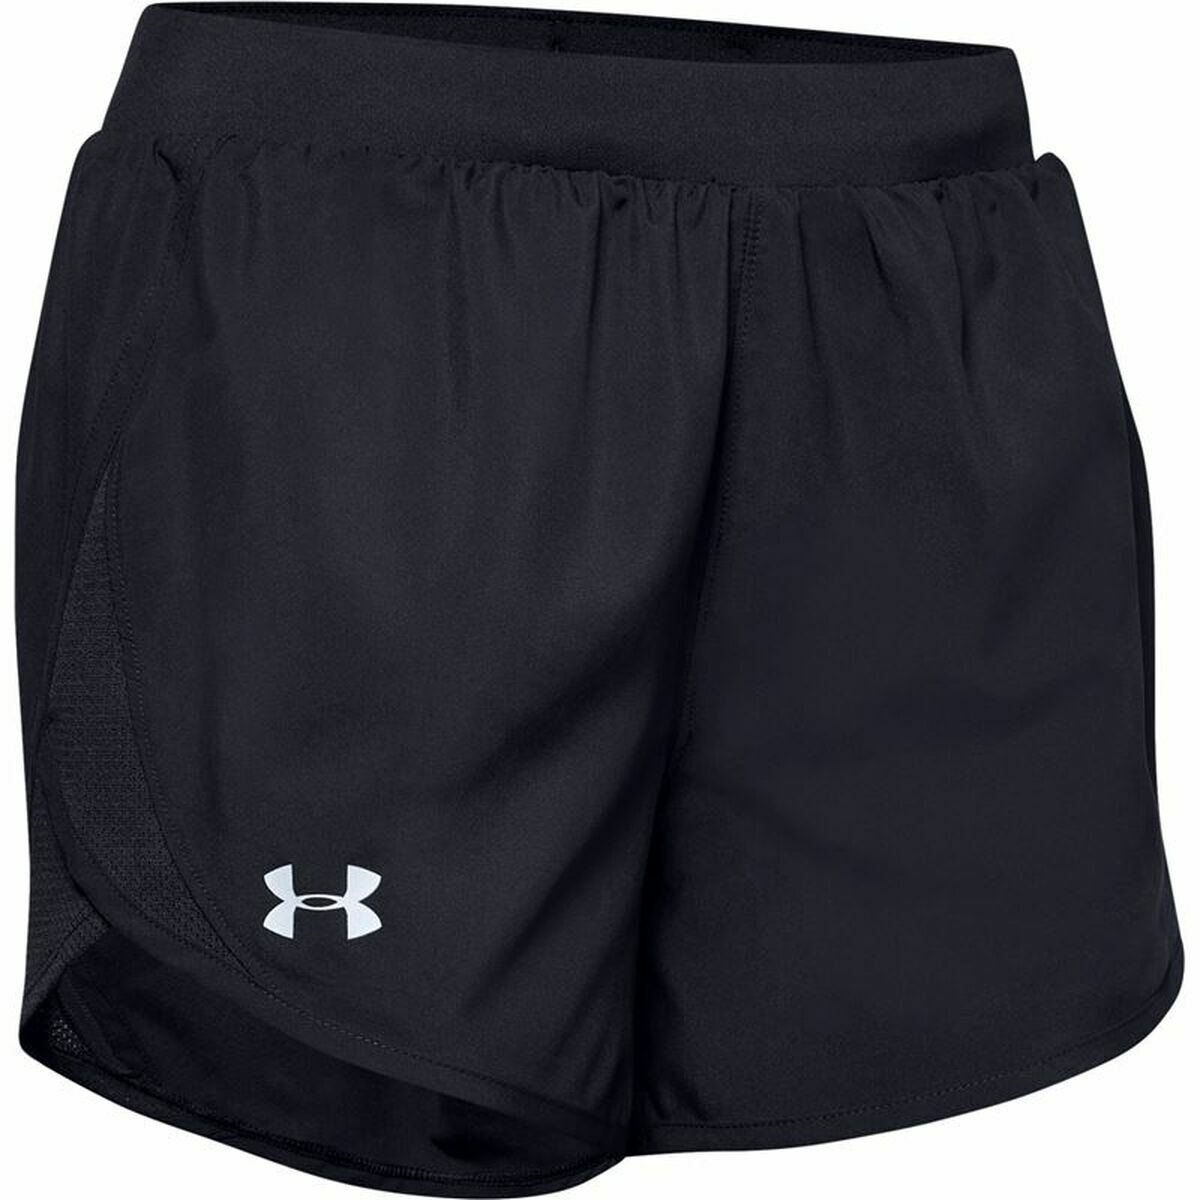 Sports Shorts for Women Under Armour Fly-By 2.0 Black XS